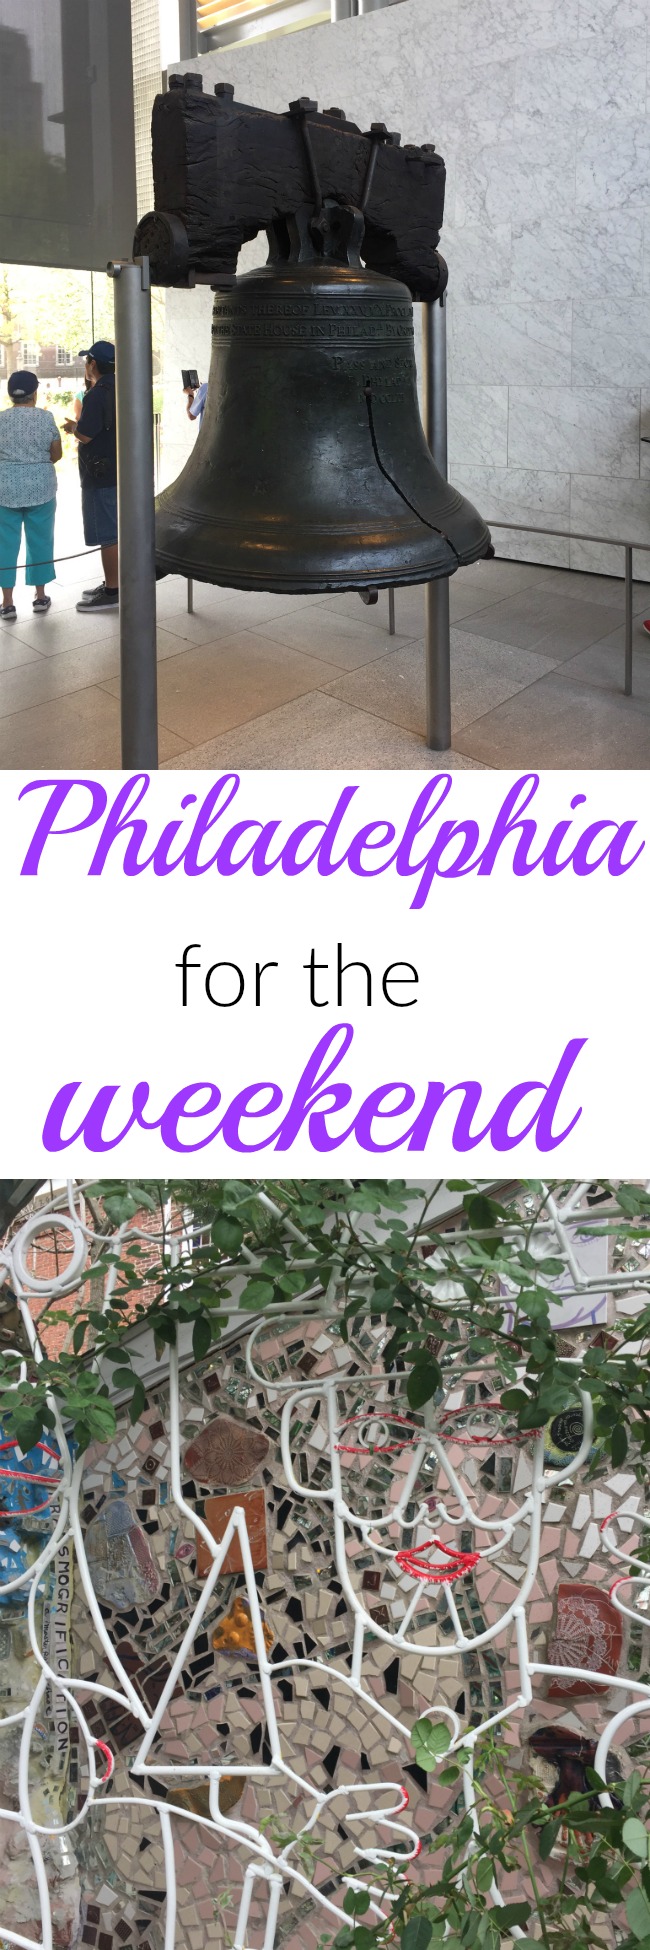 Lots to do during a weekend in Philadelphia. Check out this post for ideas on where to eat, historic sites to visit, and places to see amazing art. www.cookingismessy.com